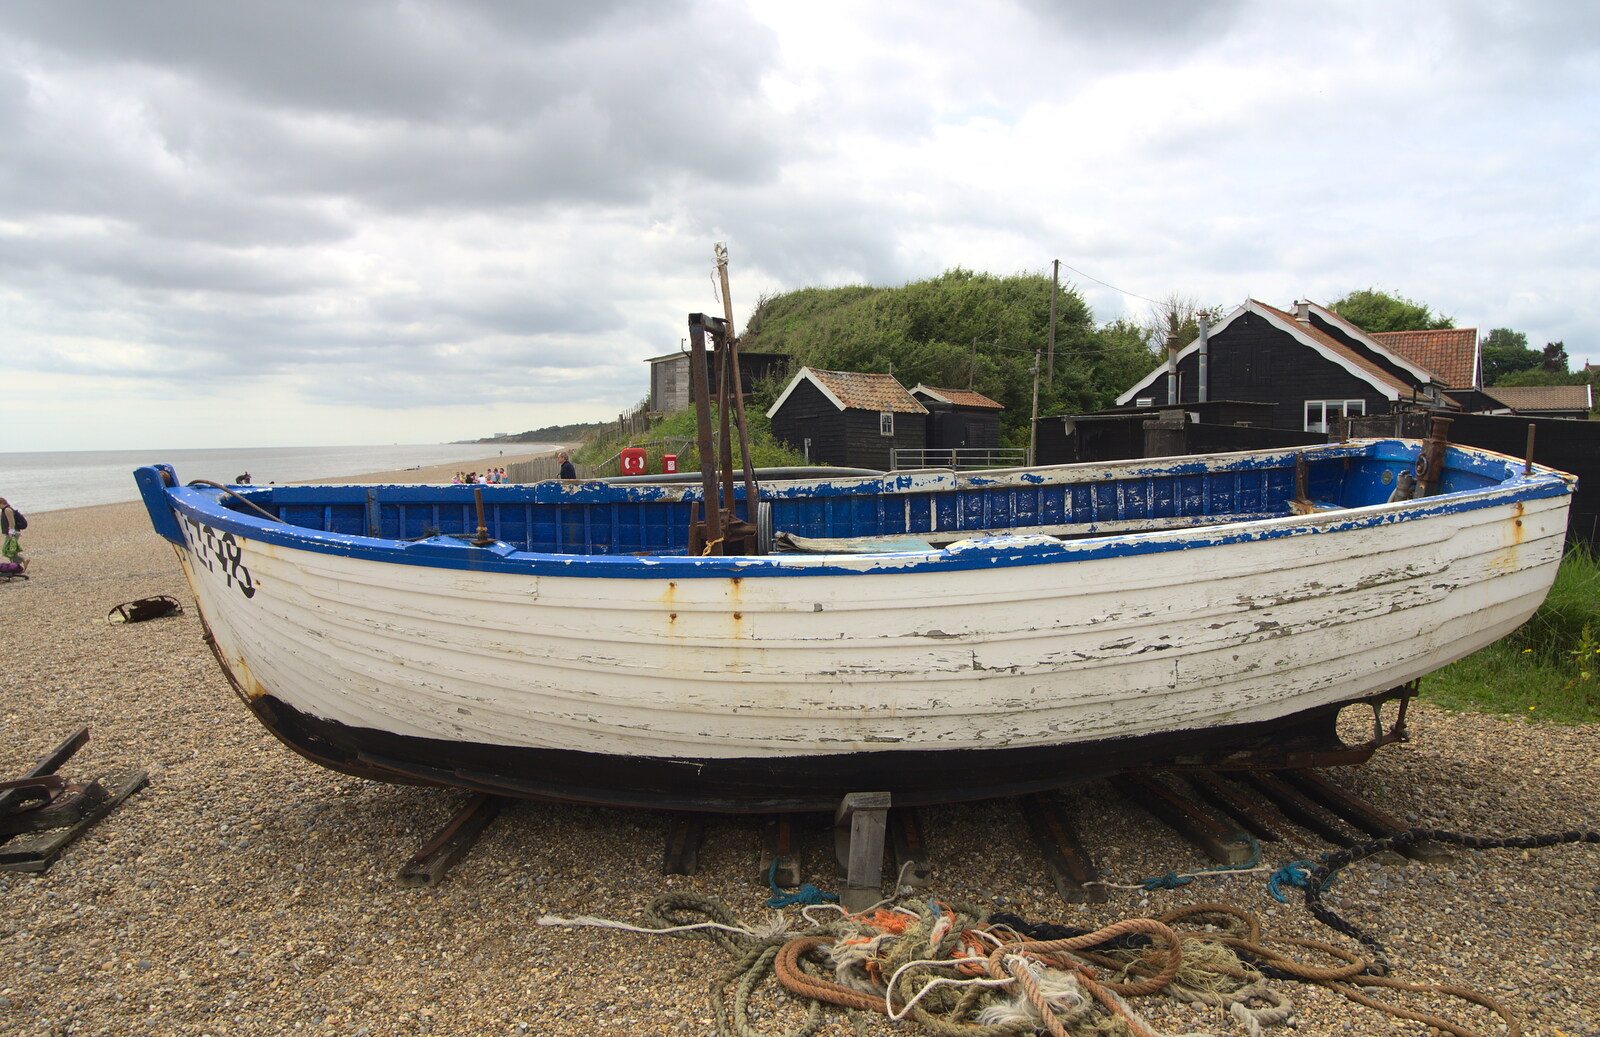 An old fishing boat on Dunwich beach from Petrol Station Destruction, and a Cliff House Camping Trip, Southwark and Dunwich, Suffolk - 30th June 2013